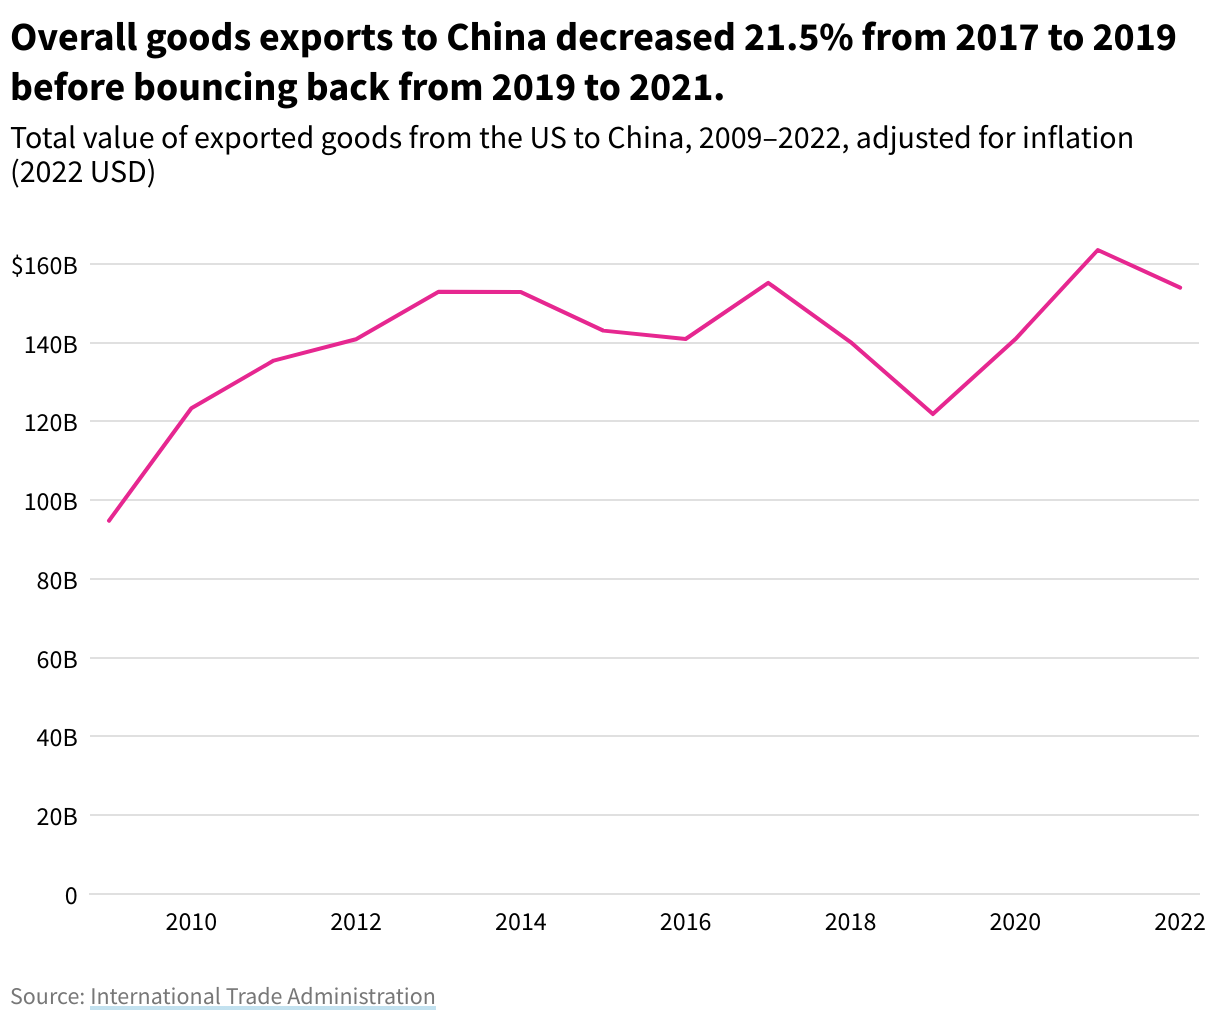 A line chart showing a 21.5% drop in overall US goods exports to China from 2017 to 2019, followed by a bounce back from 2019 to 2021.